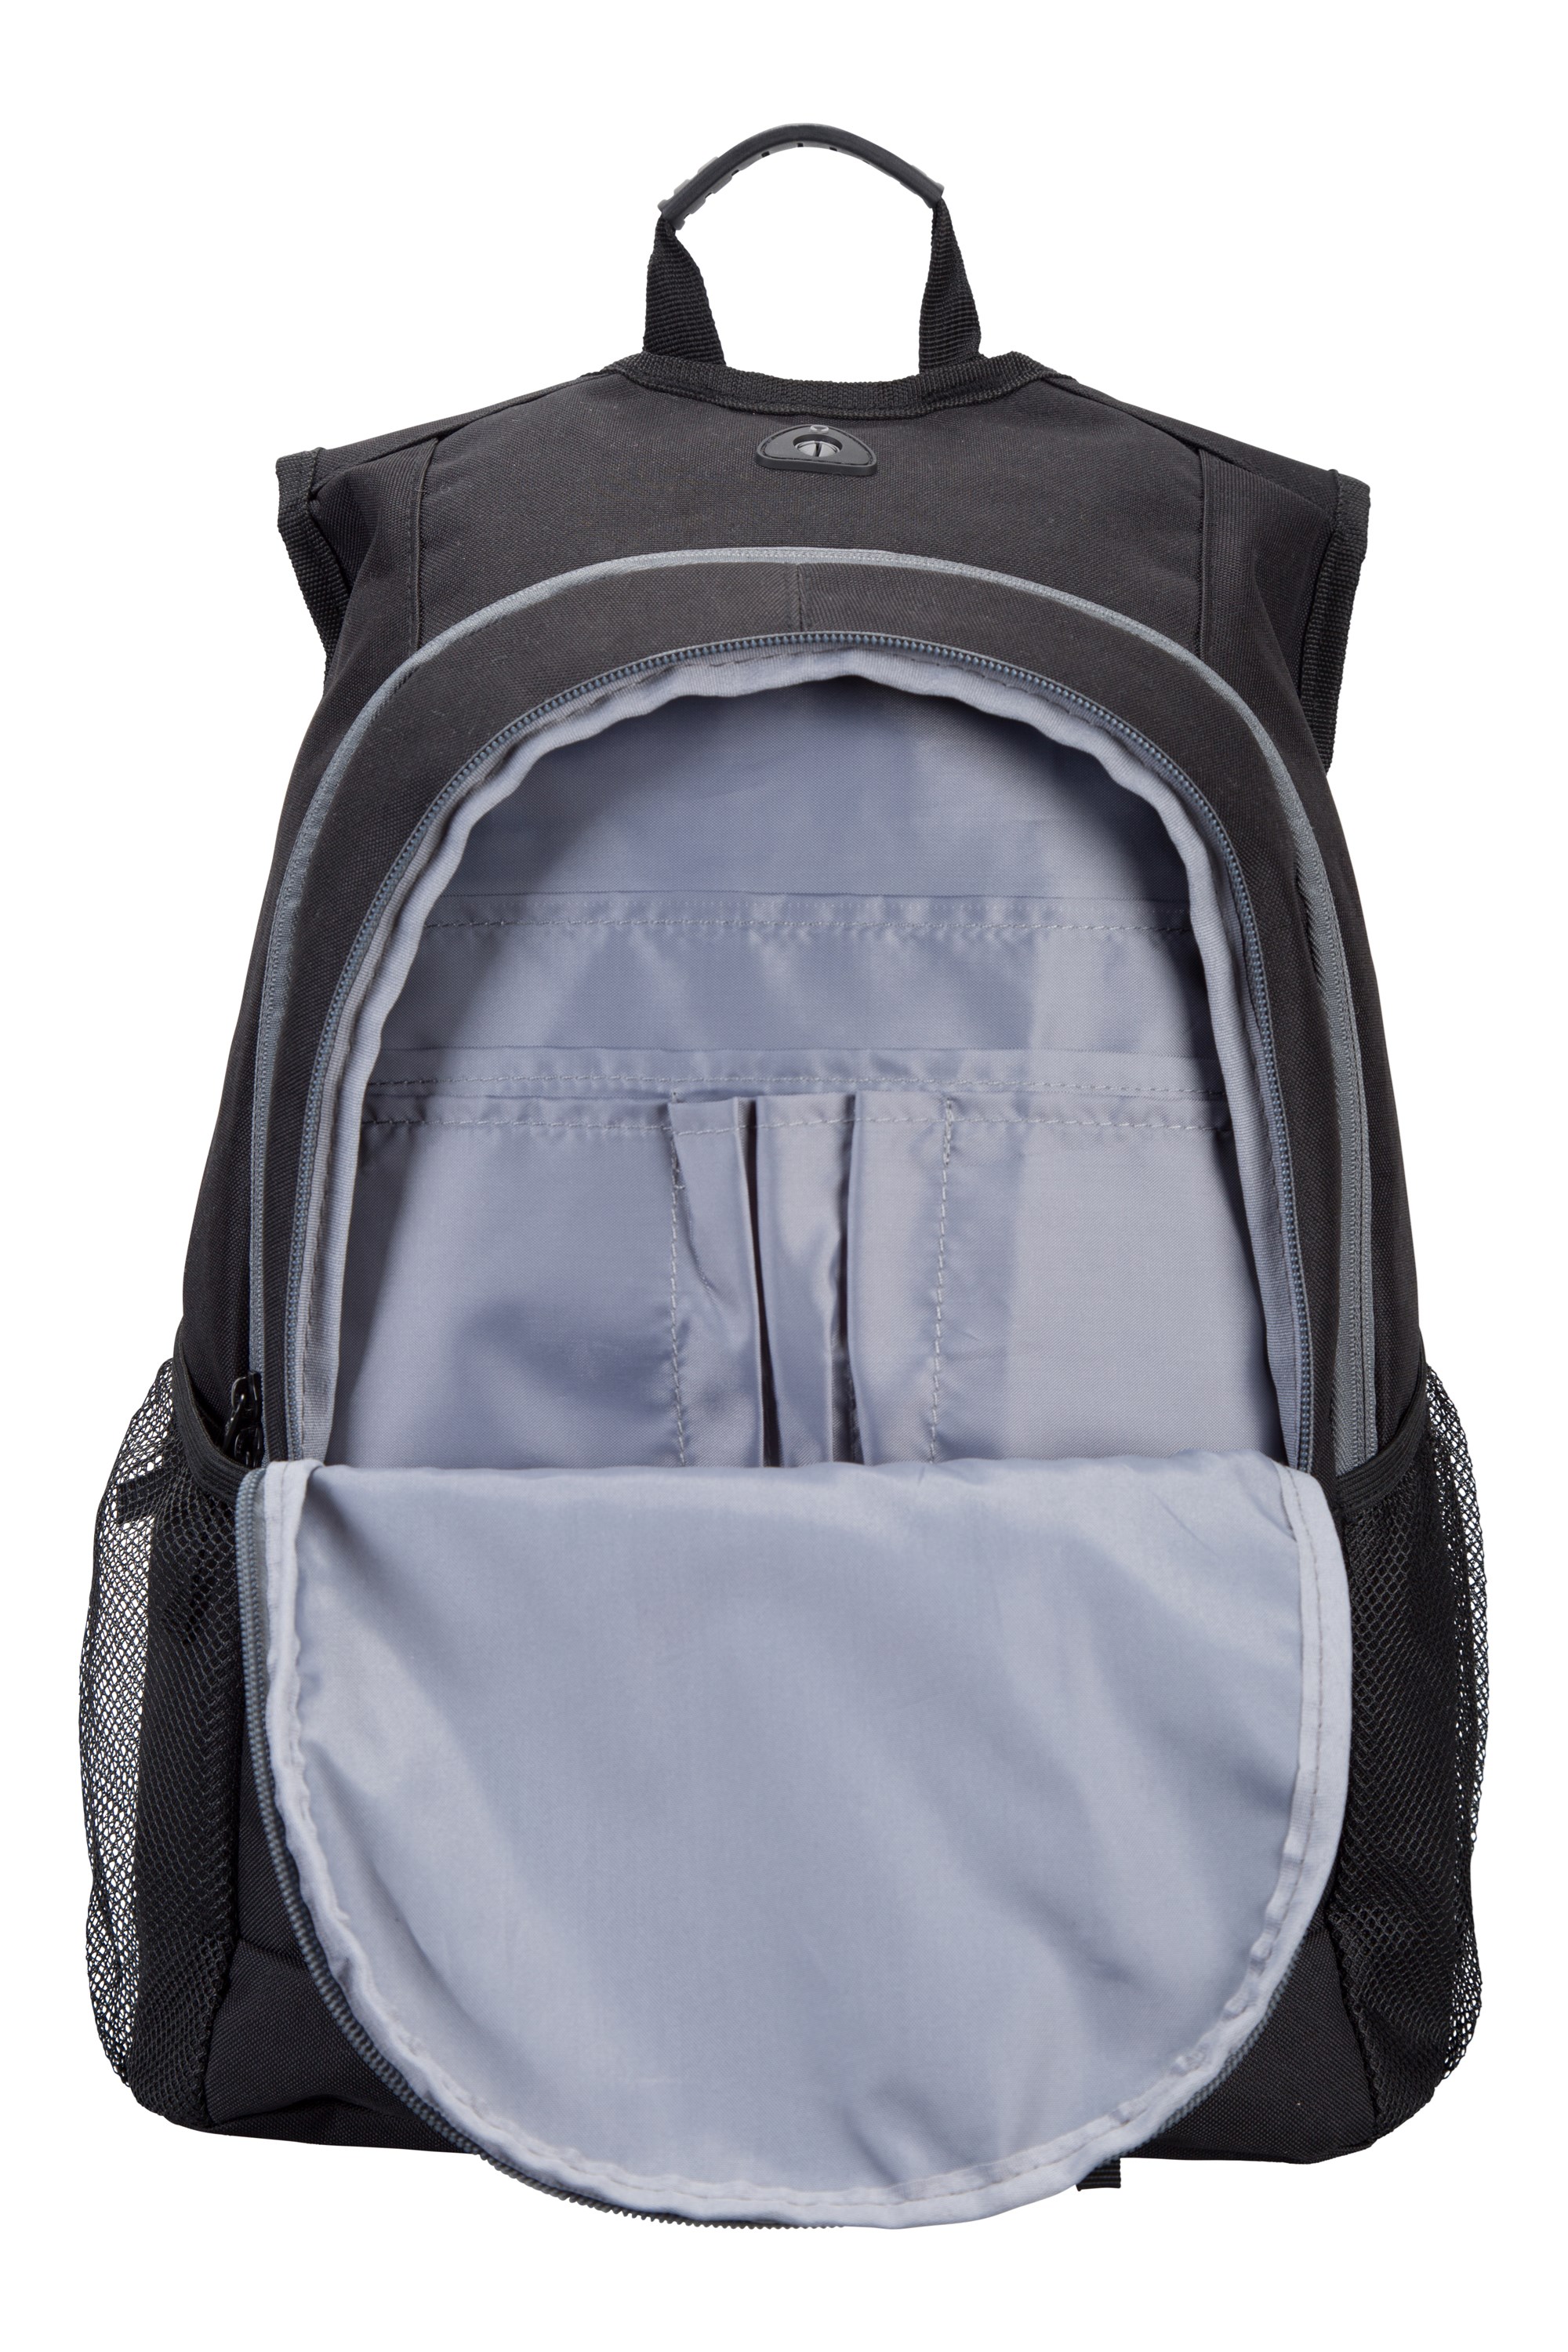 Fawkes 20 Litre Backpack